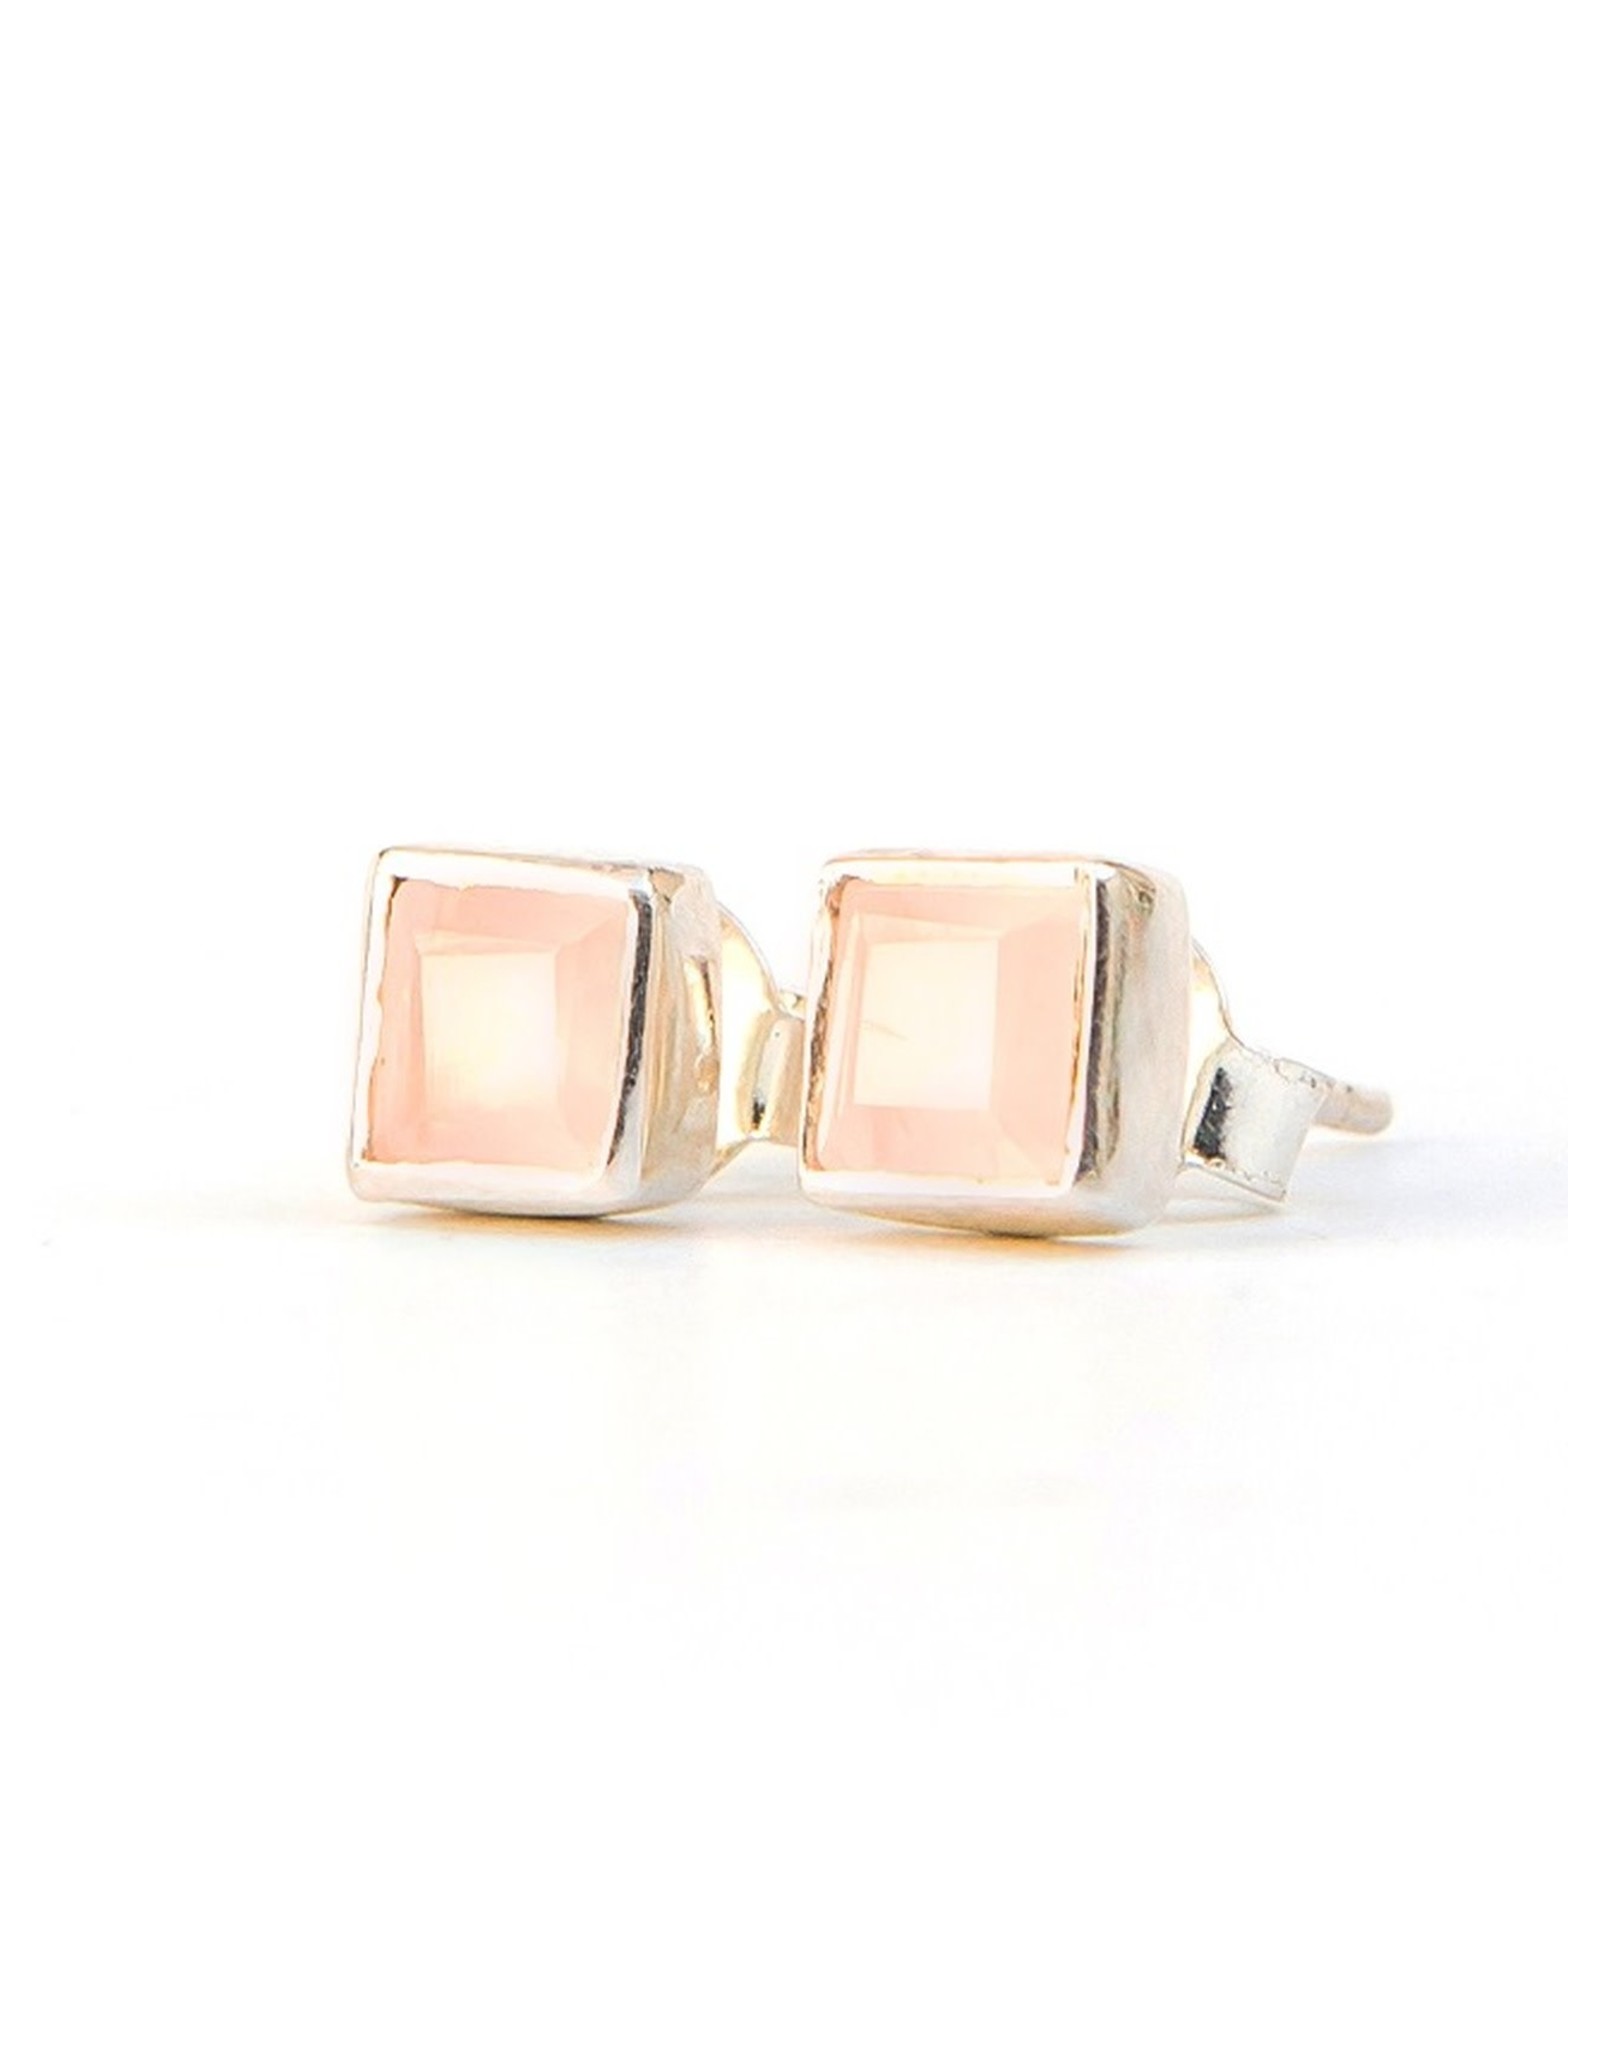 Trade roots Crystal Waters Studs Rose Quartz, Sterling Silver Earrings, India